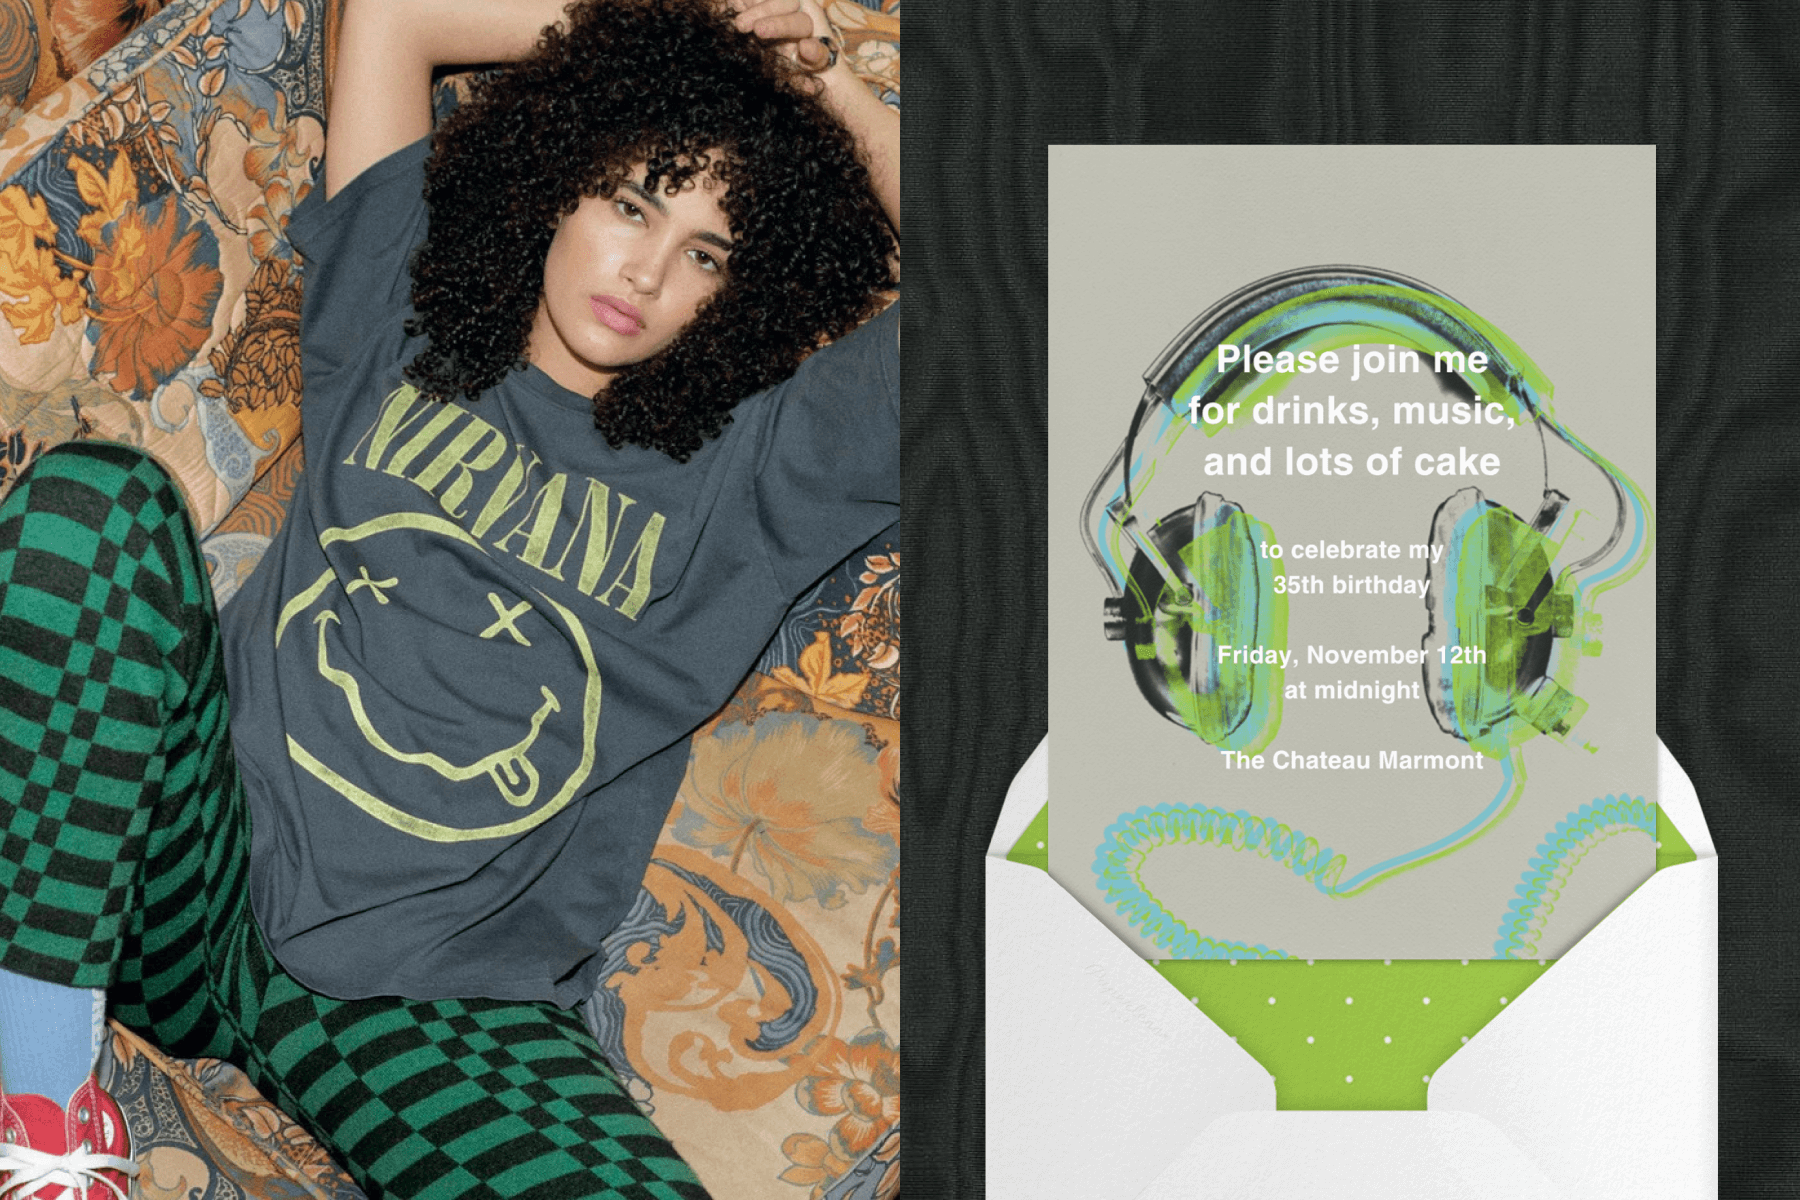 Alt text, left: A woman wears a Nirvana band tee and green checkered pants. Right: An invitation with an illustration of over-the-ear headphones.